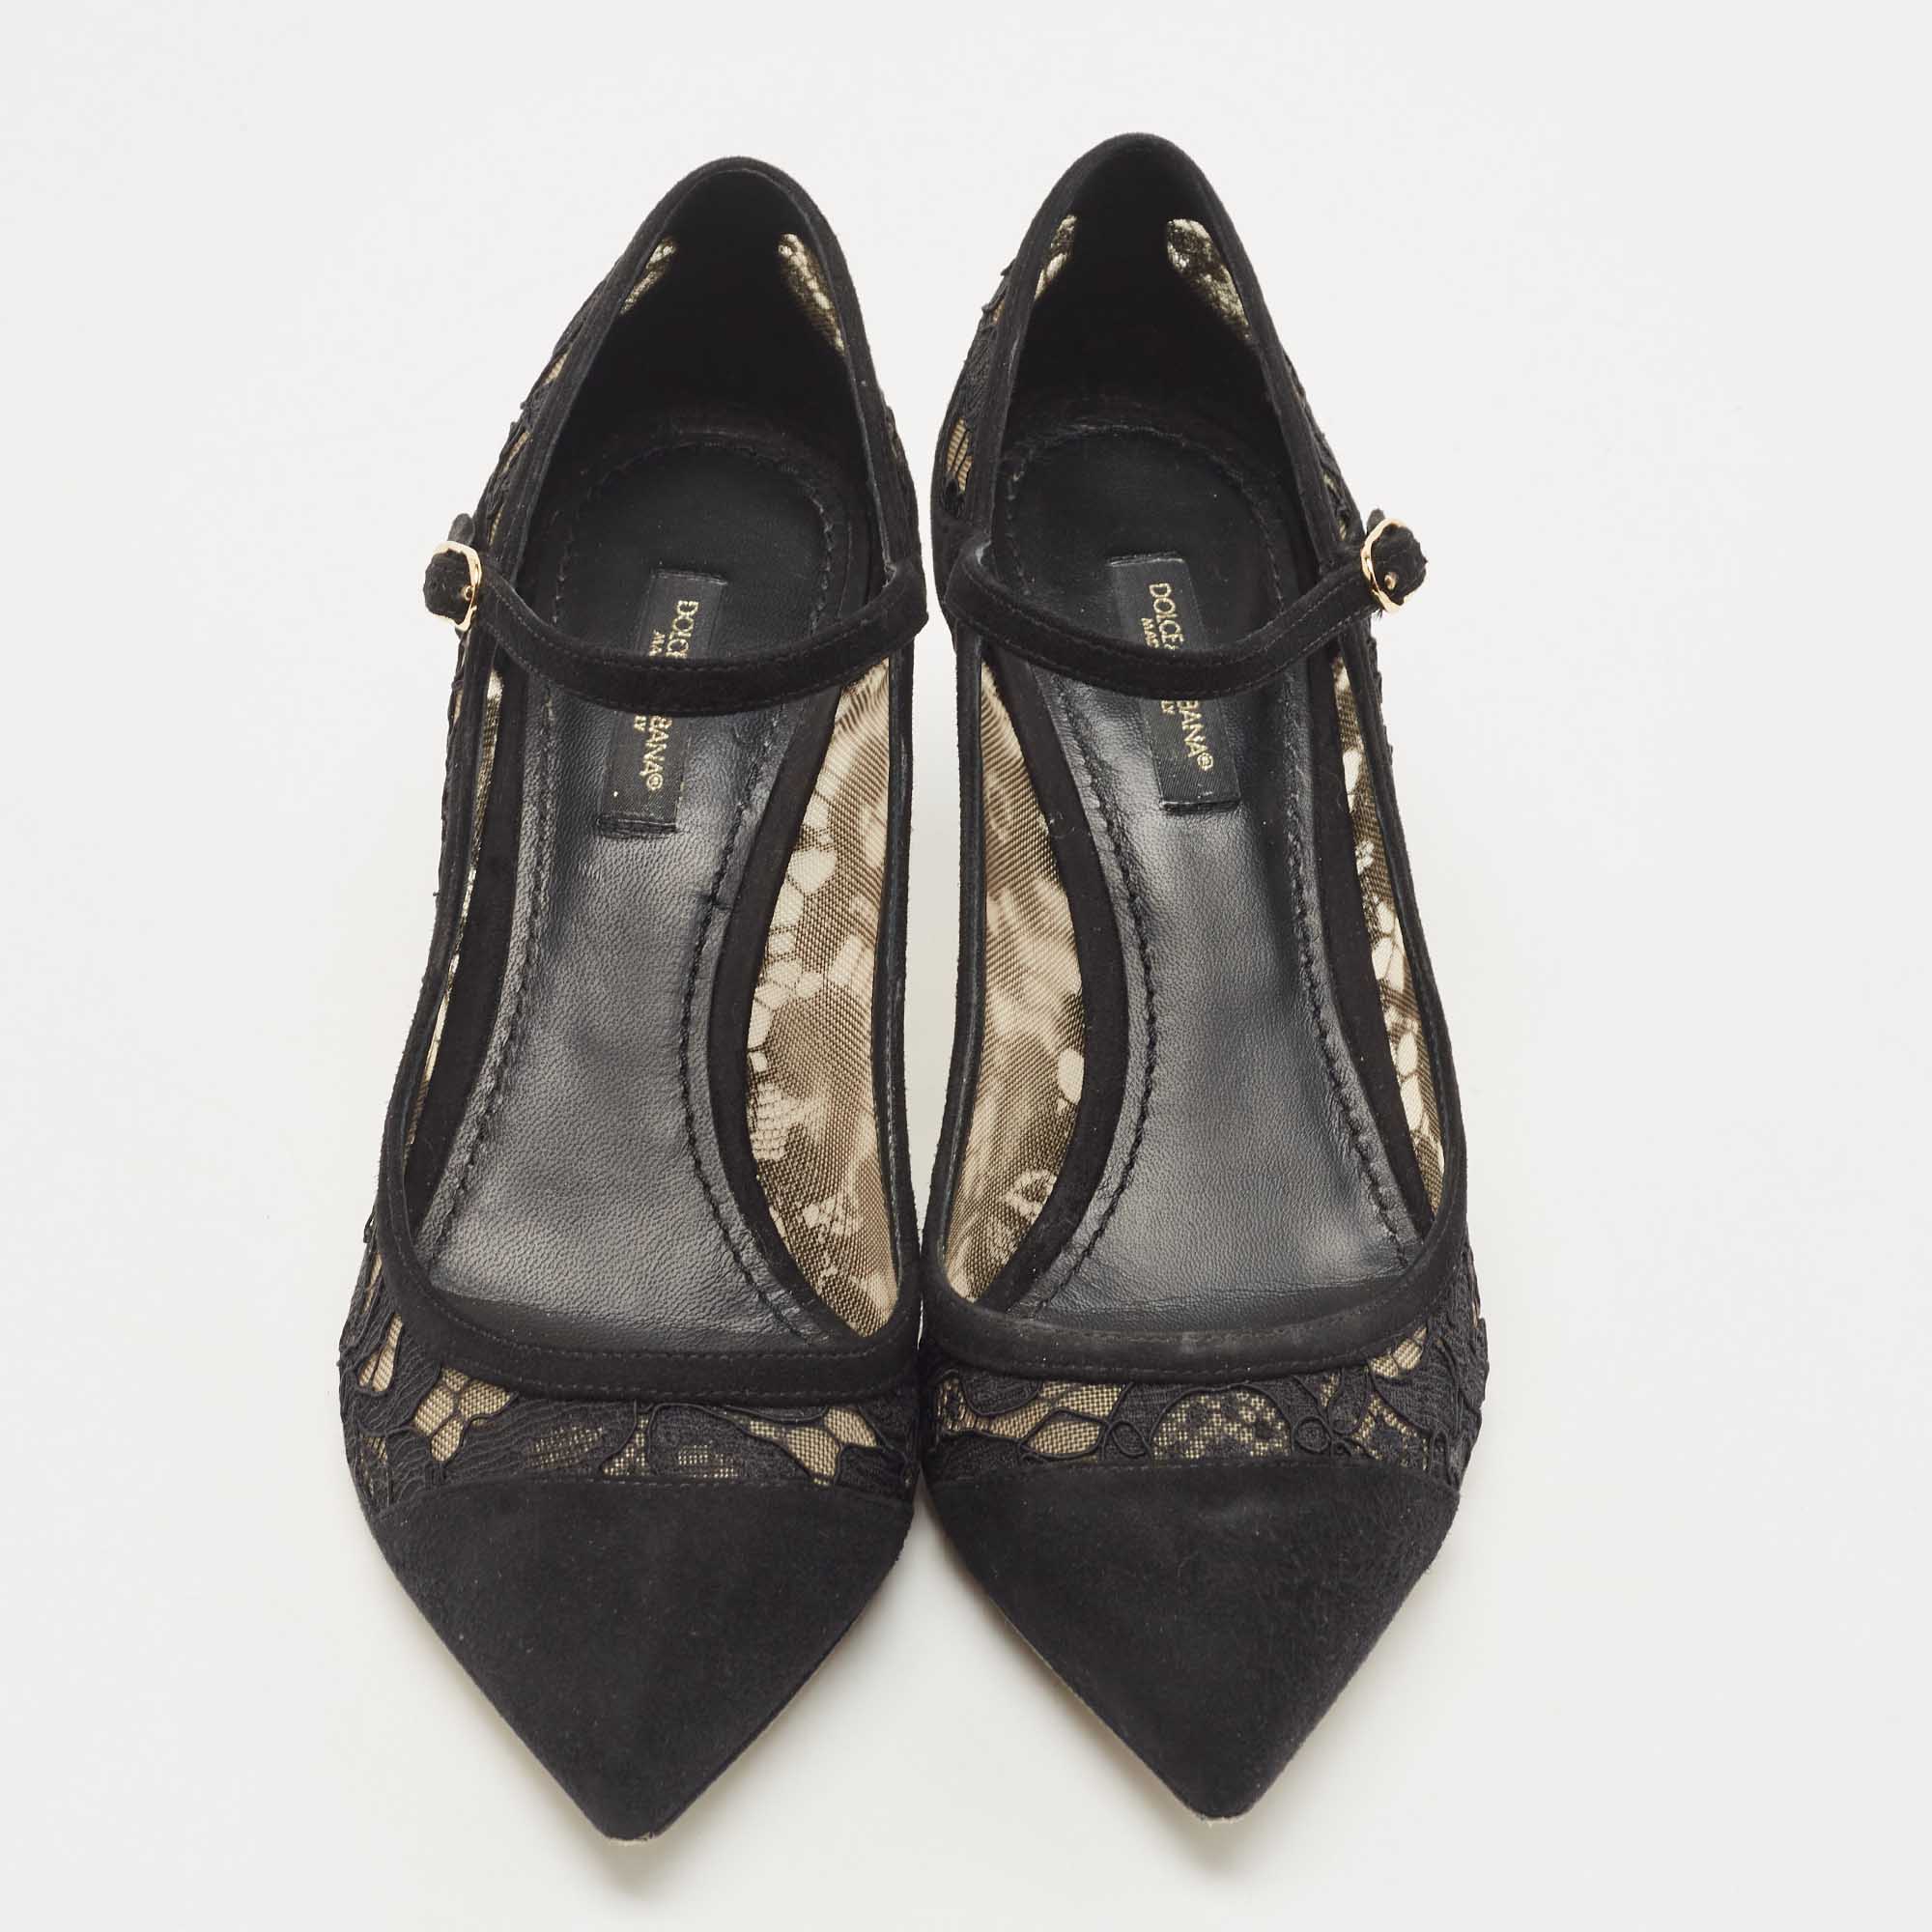 Dolce & Gabbana Black Lace And Suede Mary Jane Pumps Size 37.5